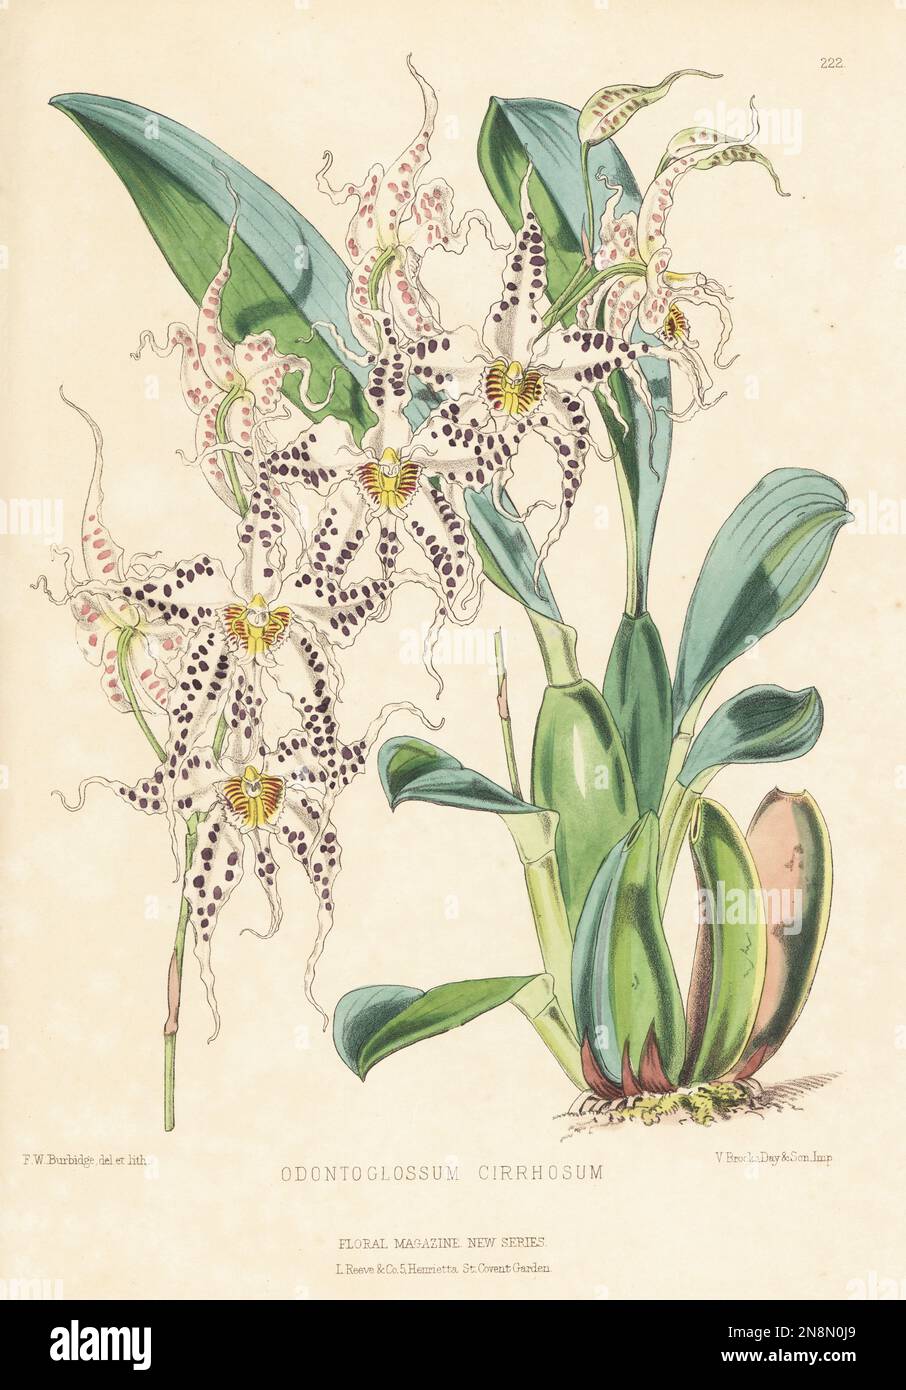 Wavy odontoglossum orchid, Oncidium cirrhosum. Native from Colombia to Ecuador, discovered by orchid hunter Franz Klaboch and his brother and imported by William Bull, Chelsea. As Odontoglossum cirrhosum. Handcolored botanical illustration drawn and lithographed by Frederick William Burbidge from Henry Honywood Dombrain's Floral Magazine, New Series, Volume 5, L. Reeve, London, 1876. Lithograph printed by Vincent Brooks, Day & Son. Stock Photo